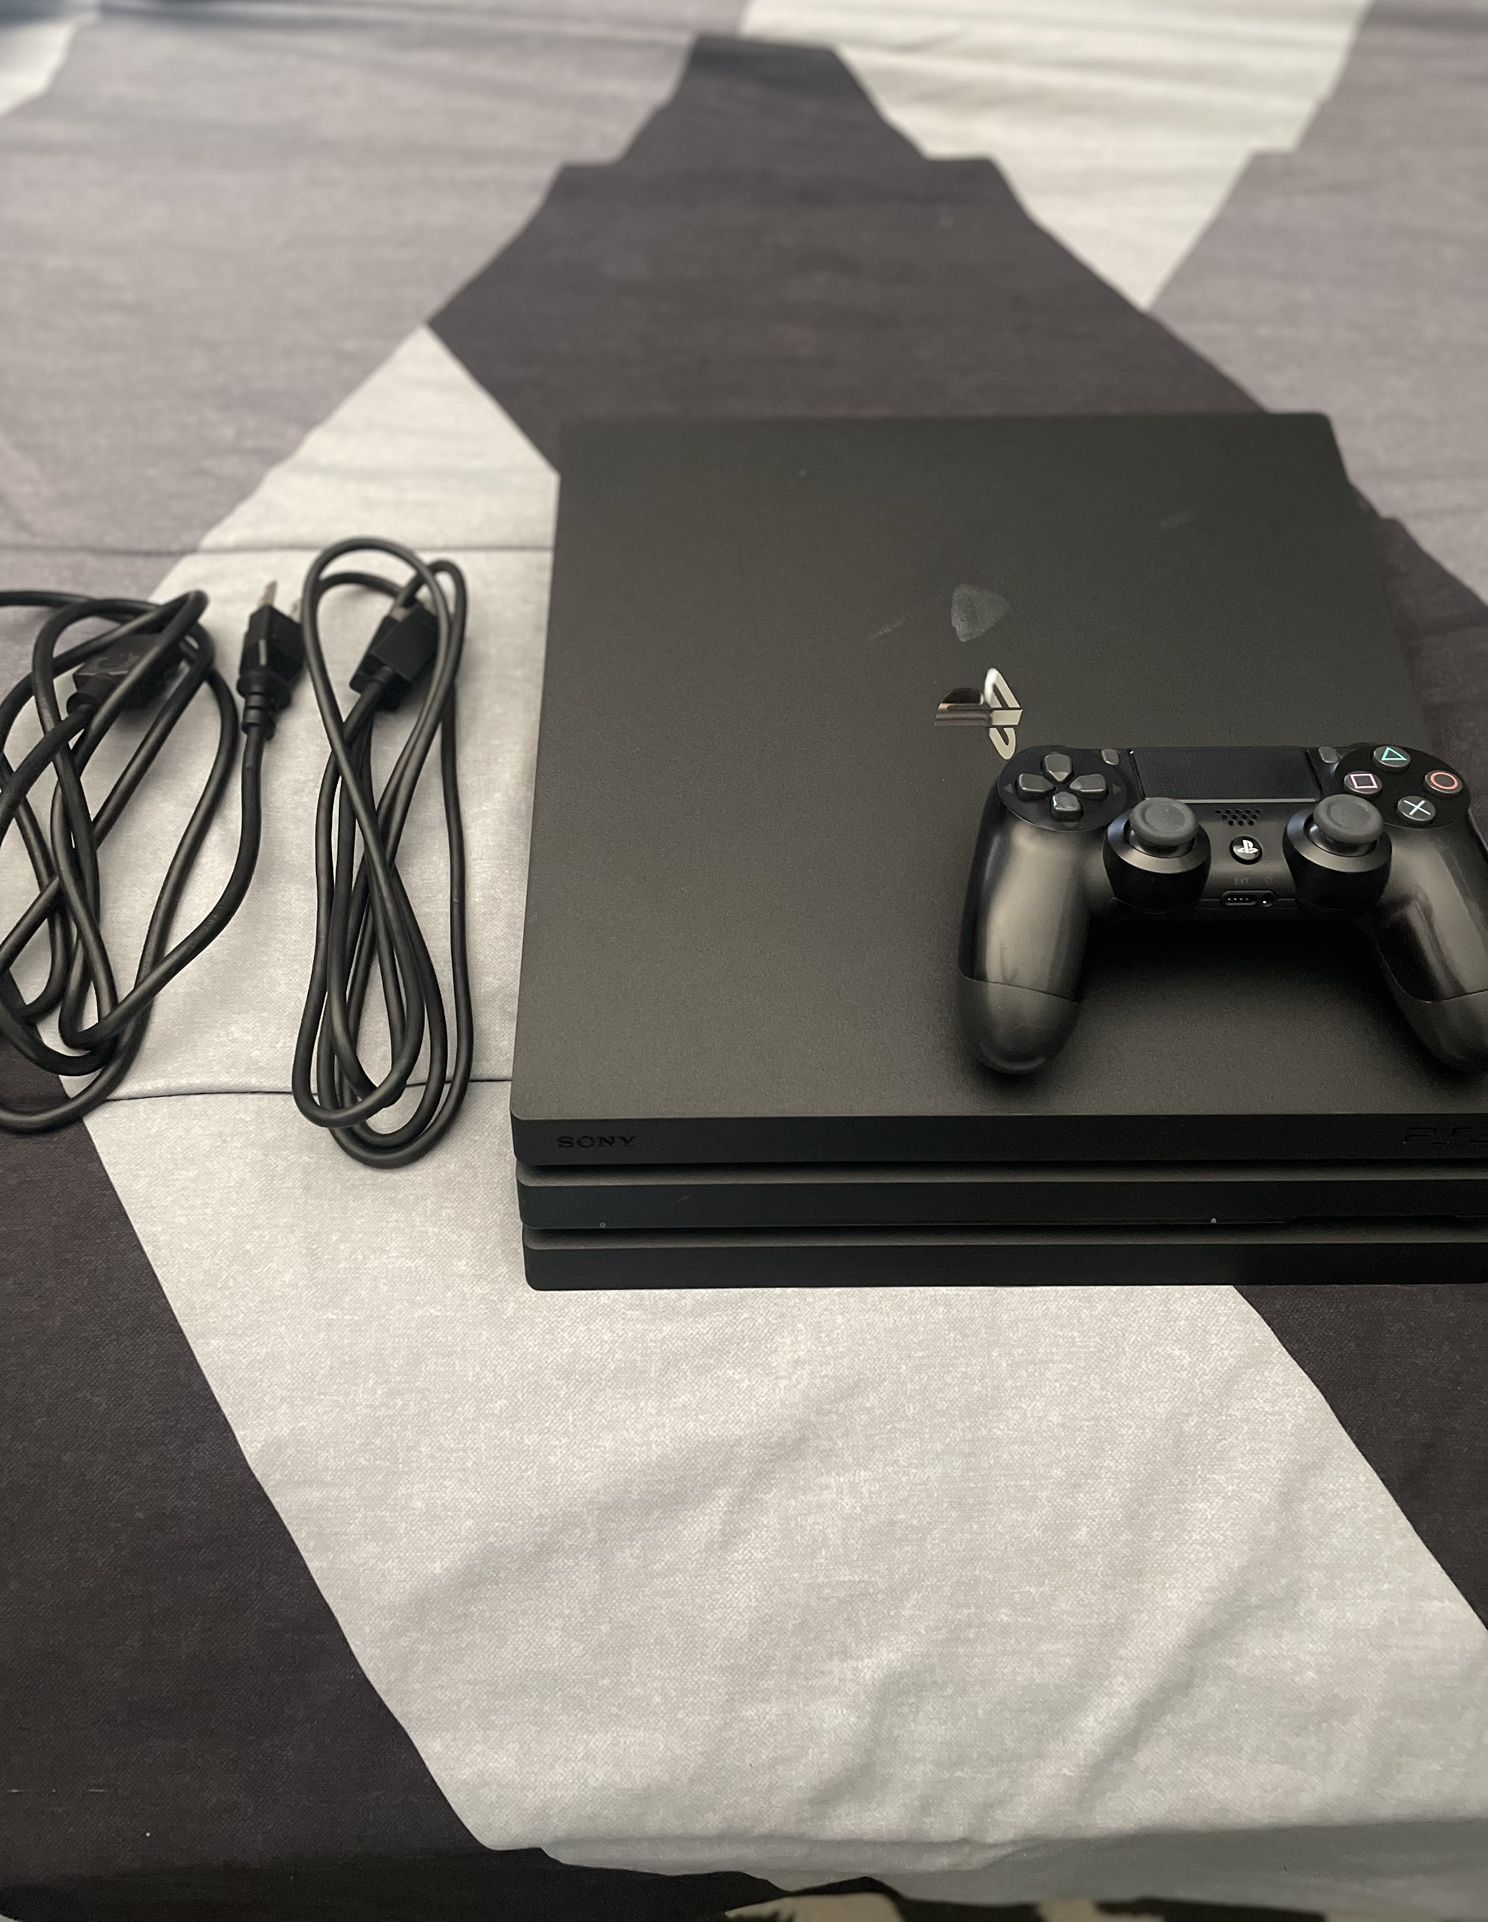 Two Year old Ps4 Pro for Sale in La Habra Heights, CA - OfferUp